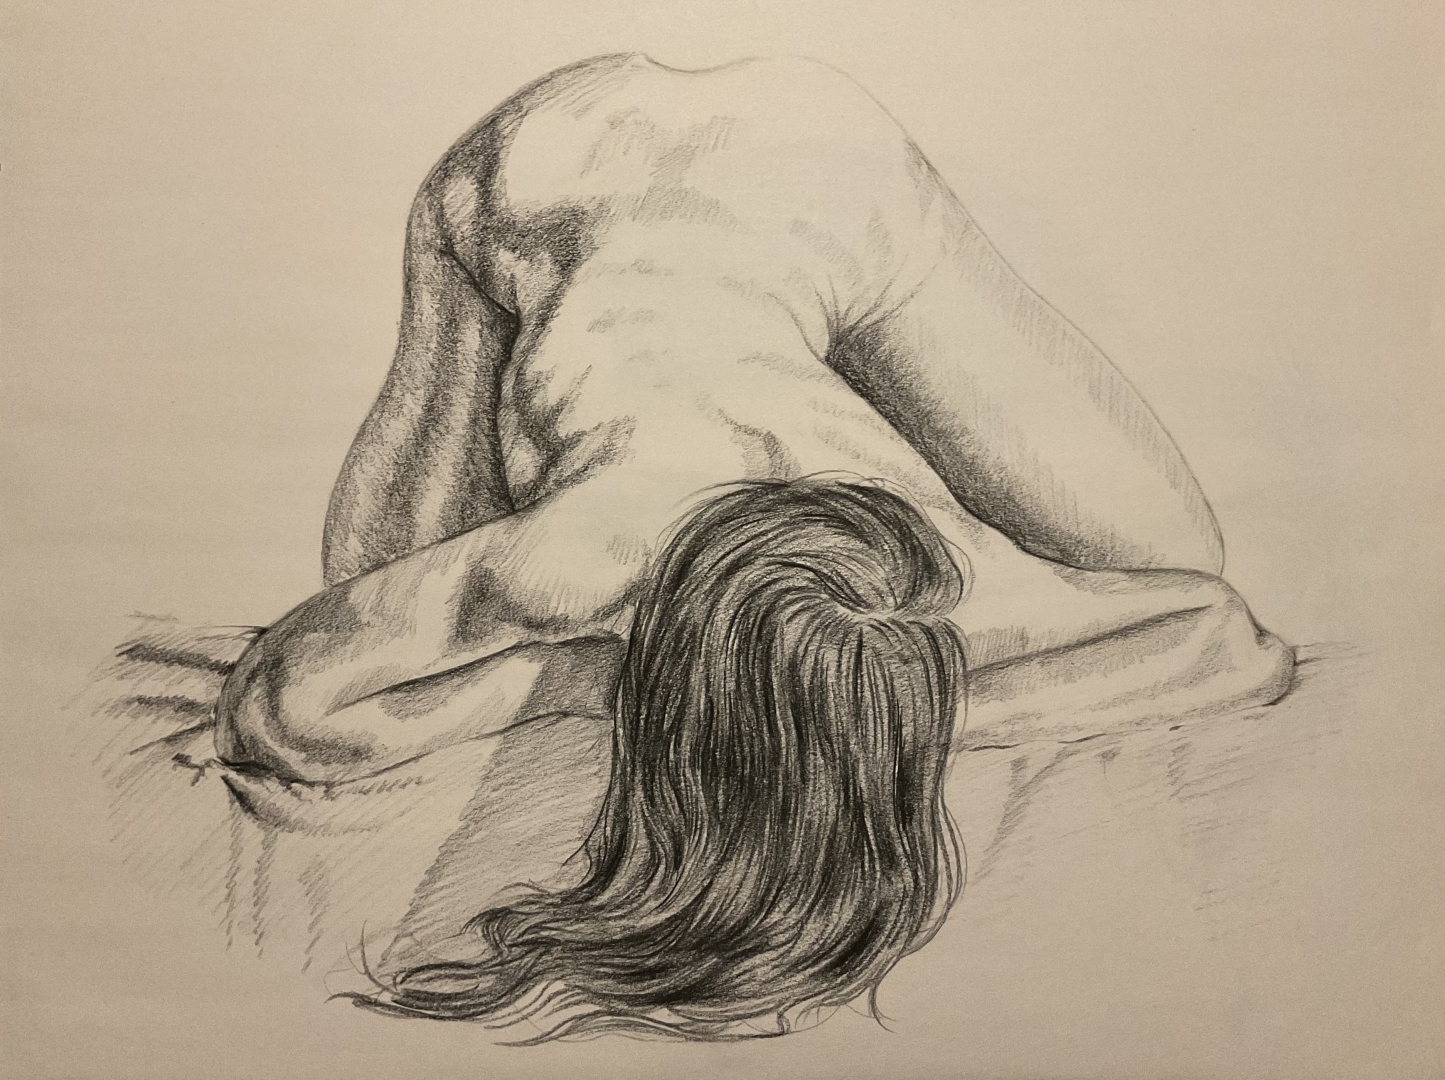 Untitled, Charcoal Drawing on Newsprint Paper 18" x 24"